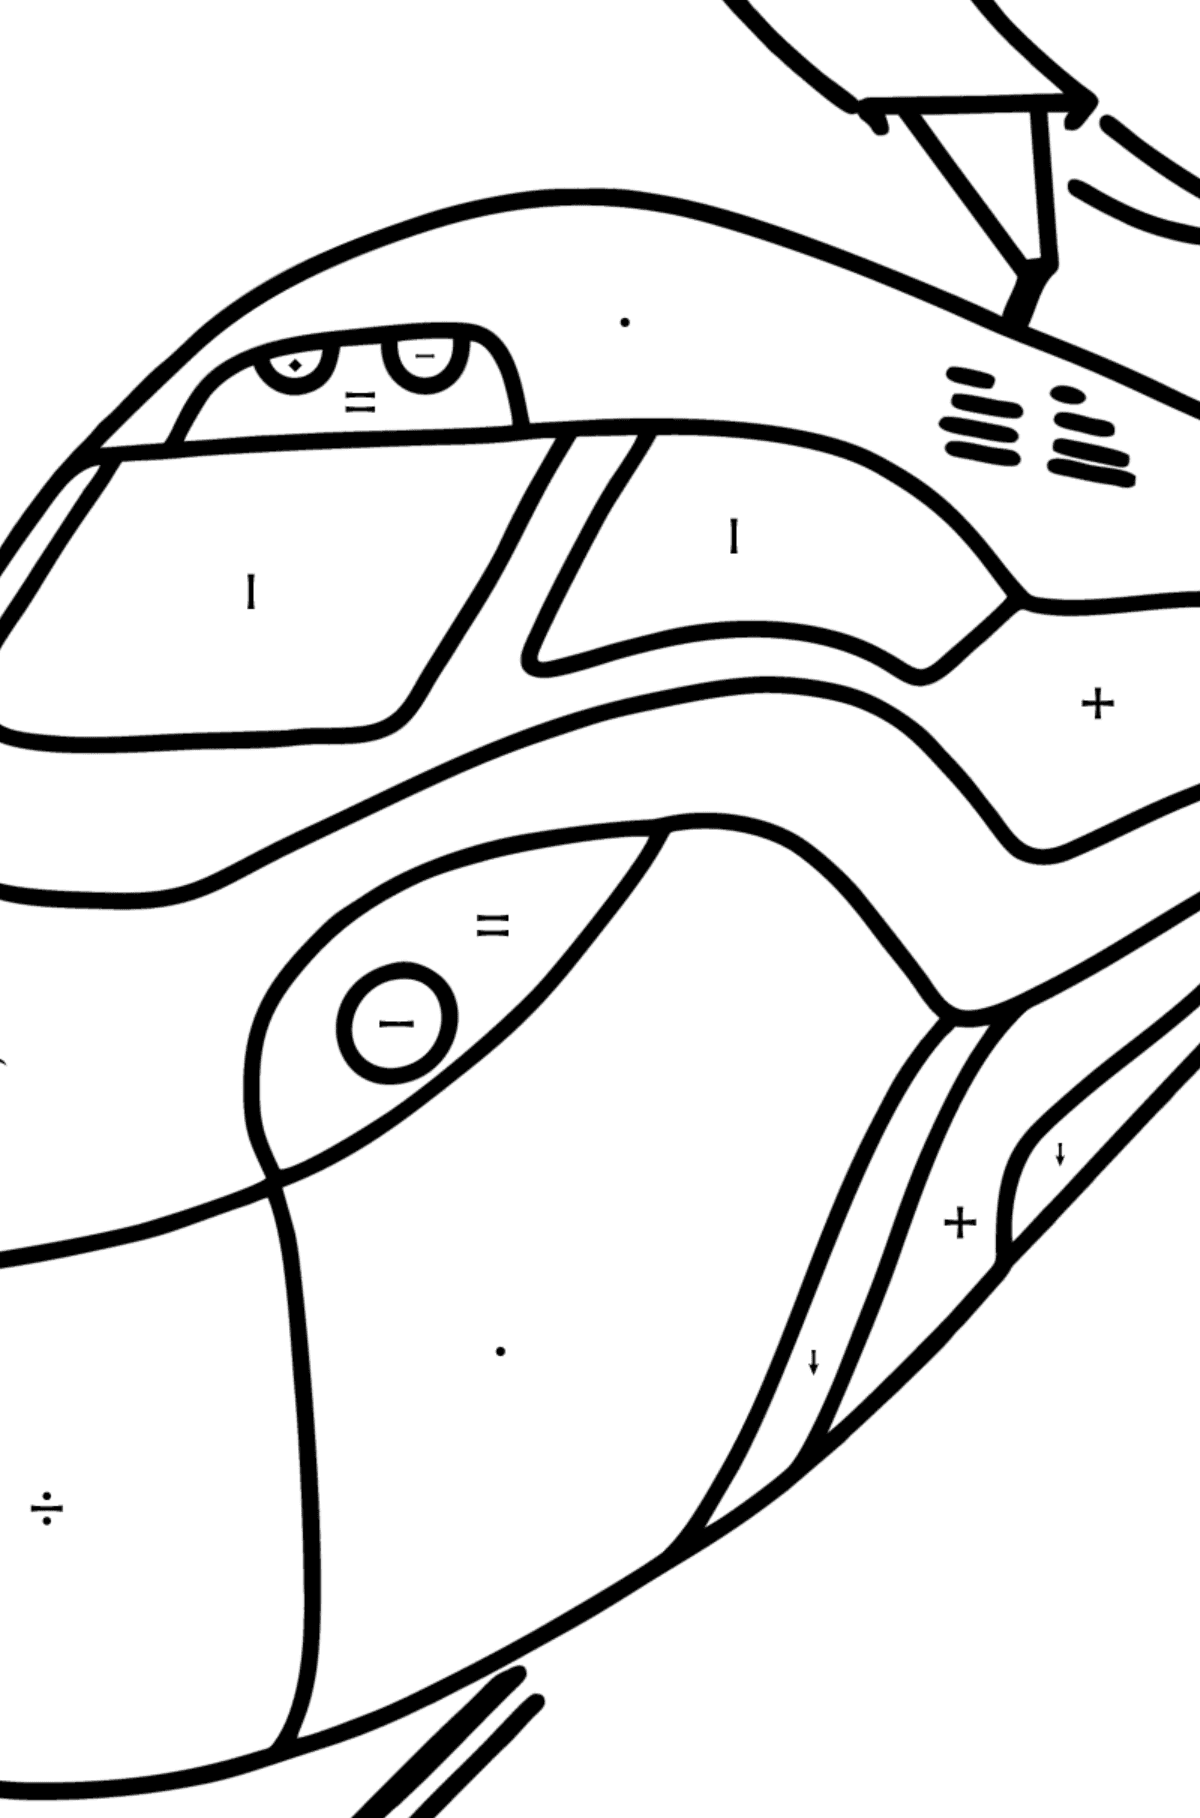 Train coloring page online - Coloring by Symbols for Kids